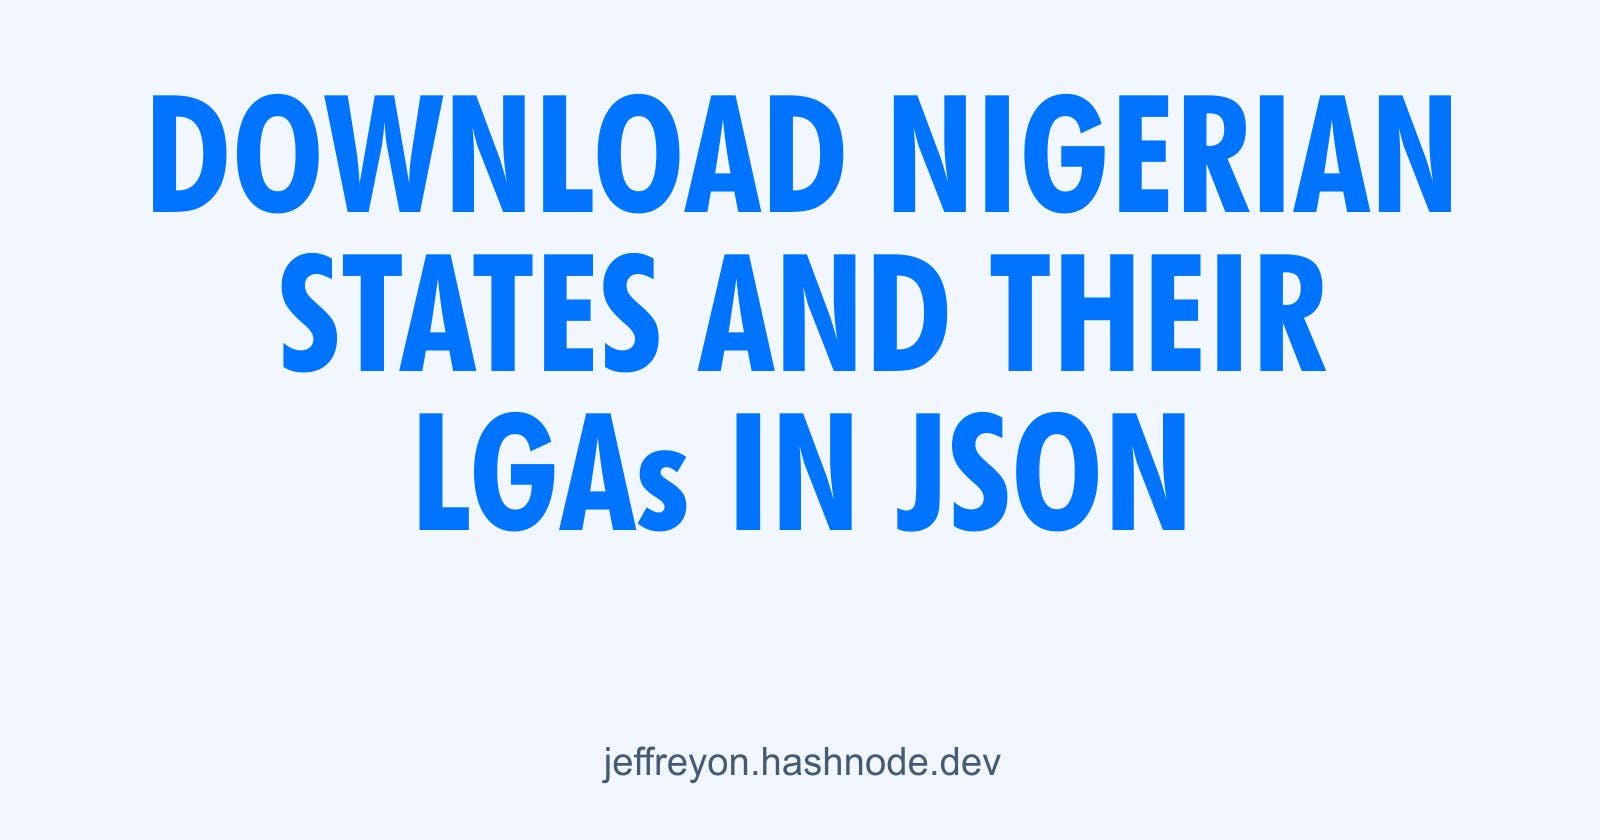 Here's a big fat list of nigerian states and their lgas in json for your projects